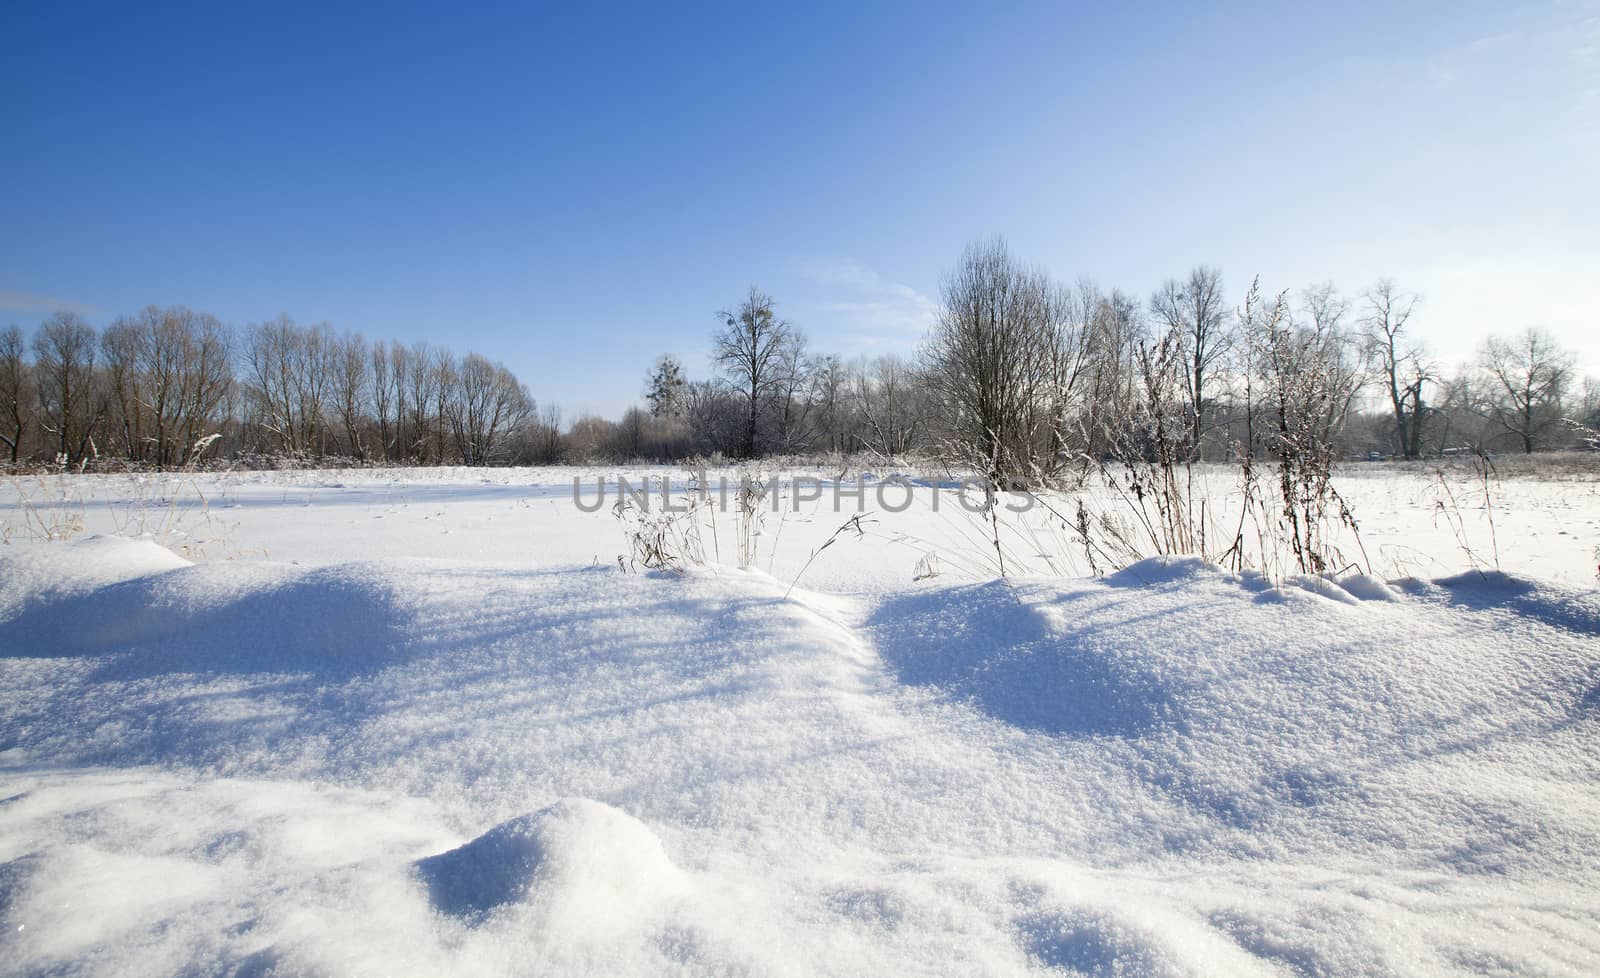   the agricultural field covered with snow in a winter season